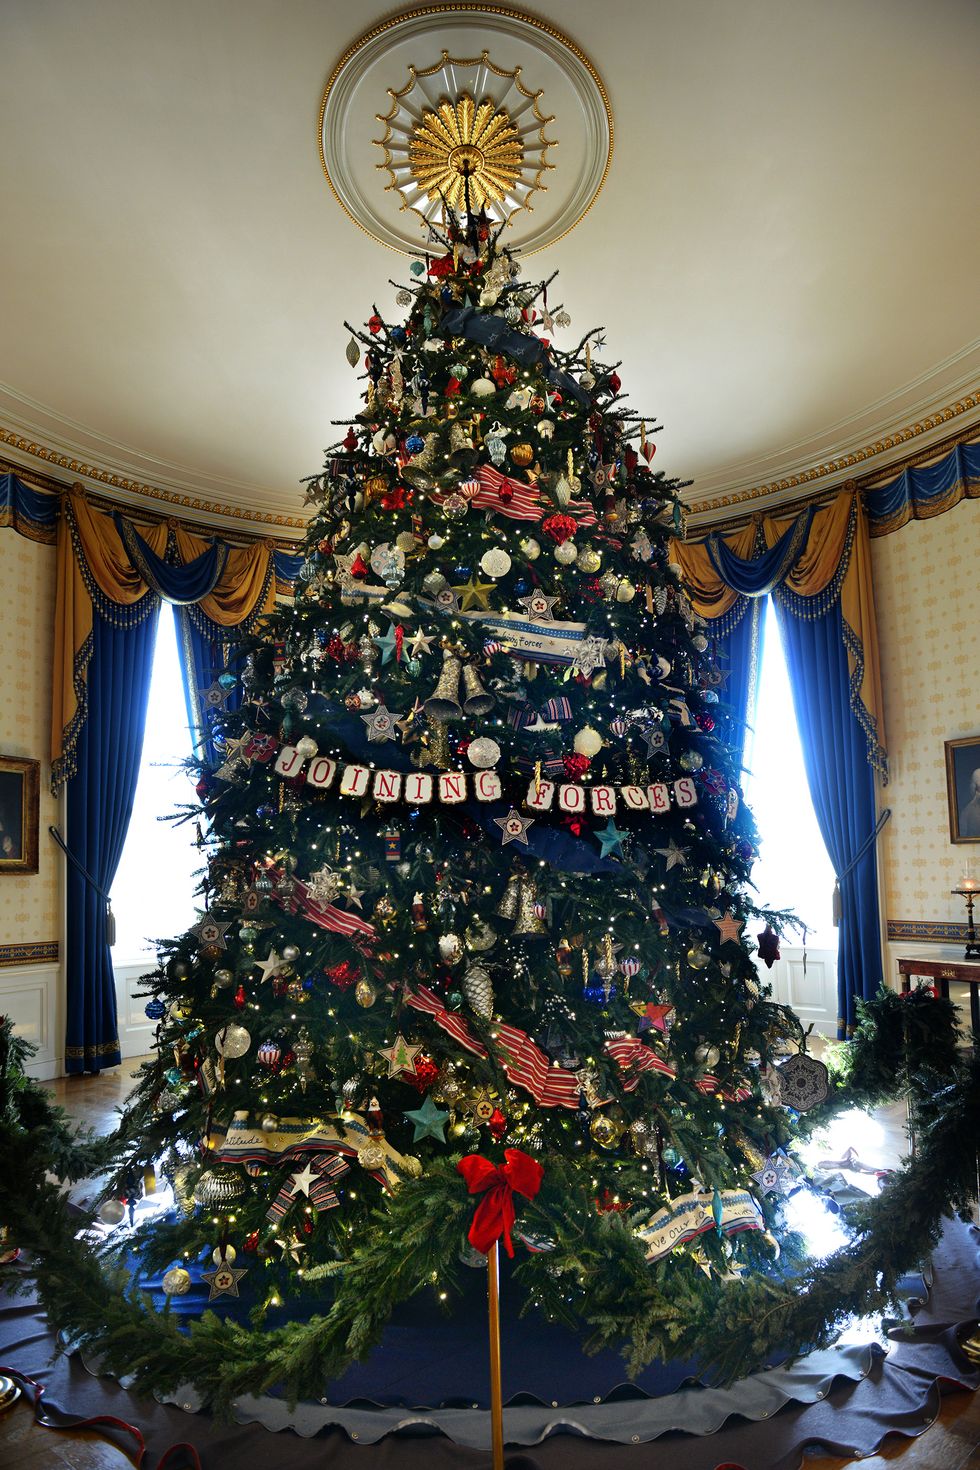 https://hips.hearstapps.com/hmg-prod/images/view-of-the-tree-in-the-blue-room-as-the-first-lady-news-photo-157208902-1543285736.jpg?crop=0.99982xw:1xh;center,top&resize=980:*